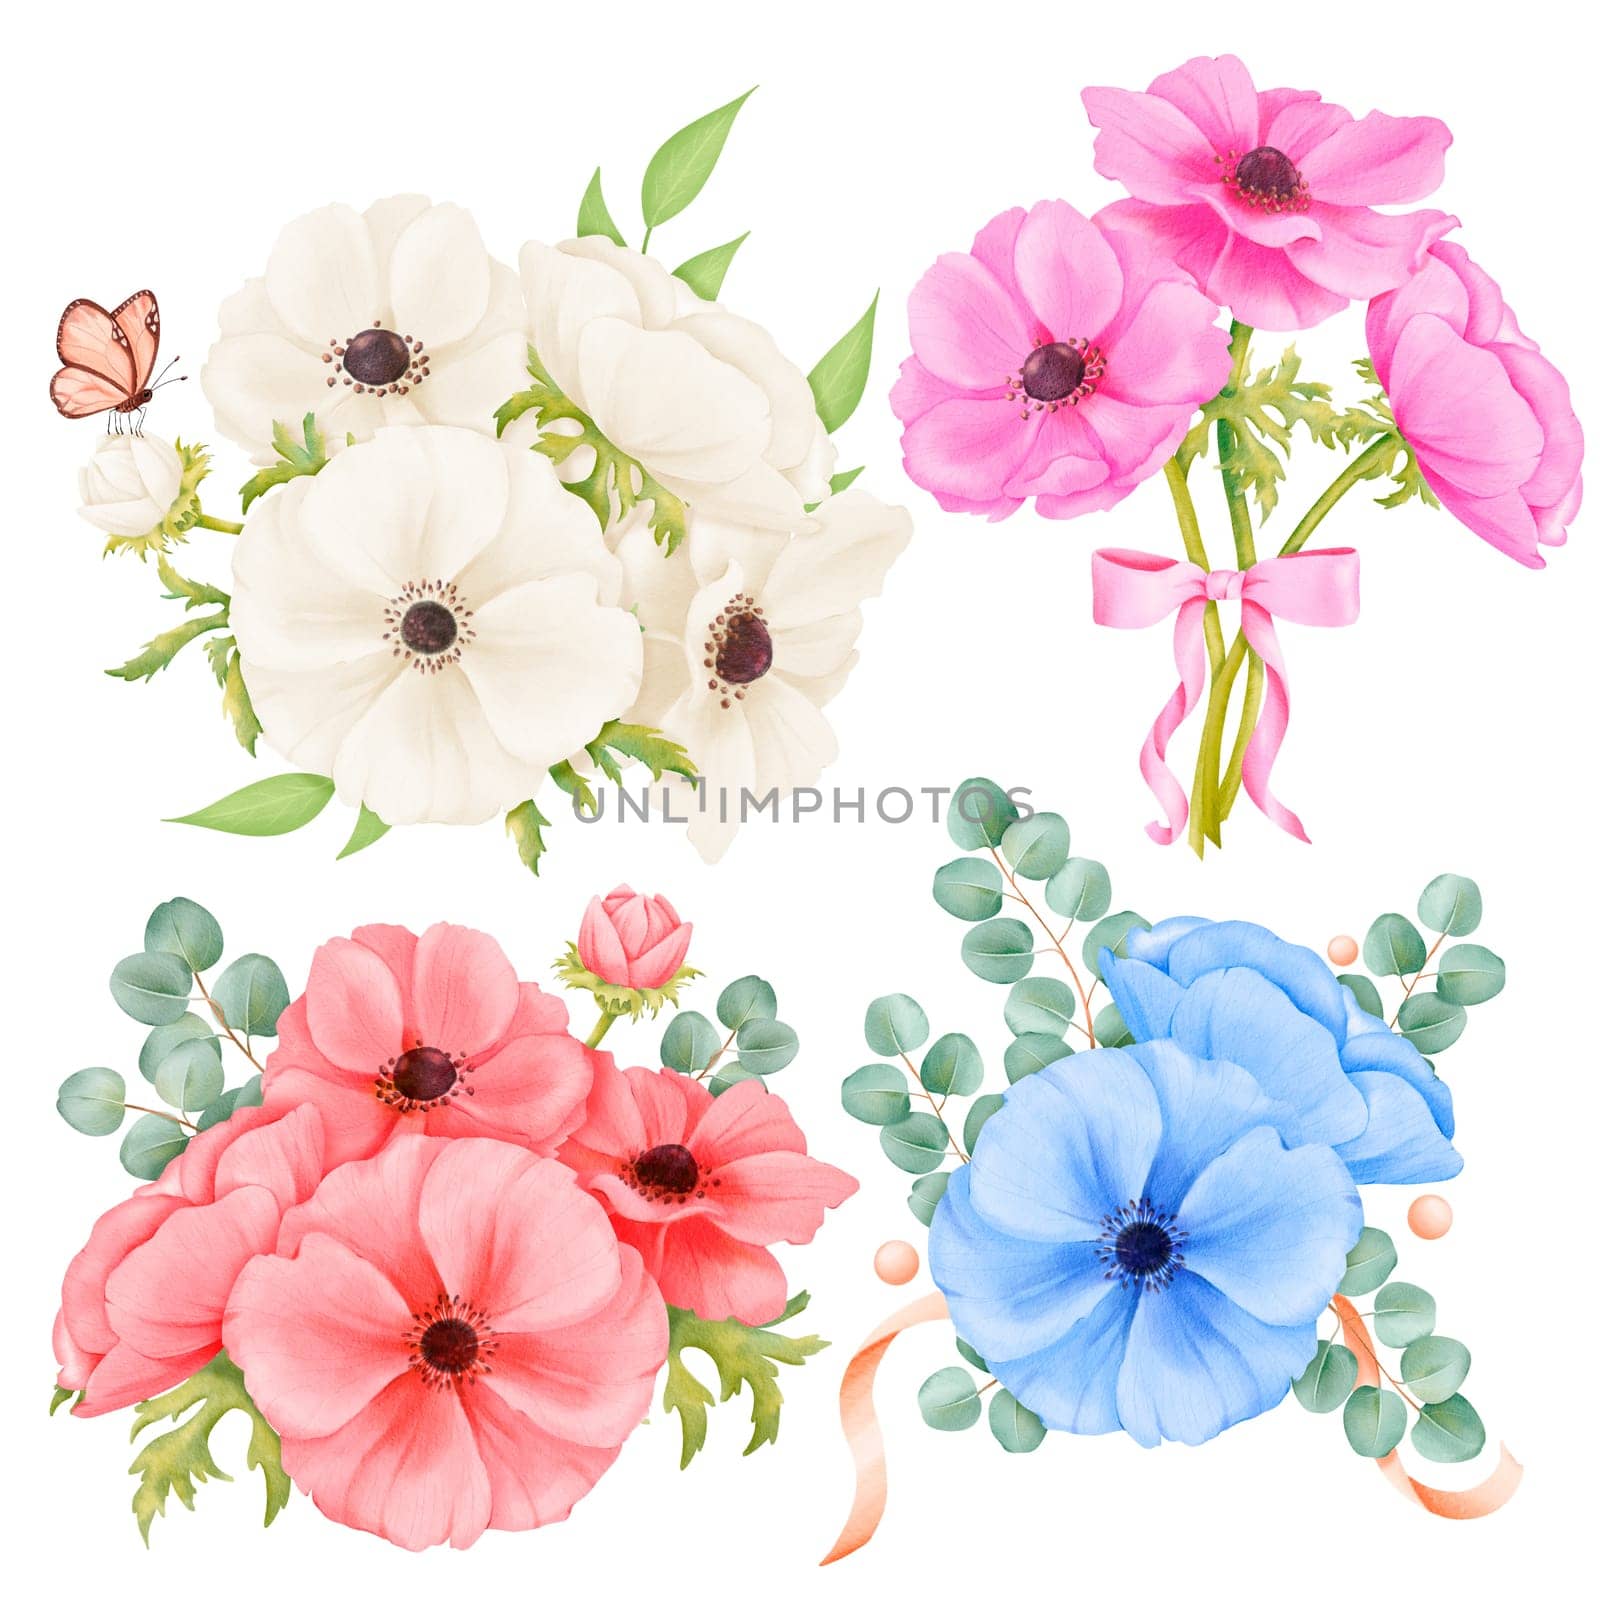 Watercolor set featuring anemone bouquets in various colors. adorned with satin ribbons, butterflies and eucalyptus sprigs. for wedding stationery, event invitations, floral designs backgrounds.